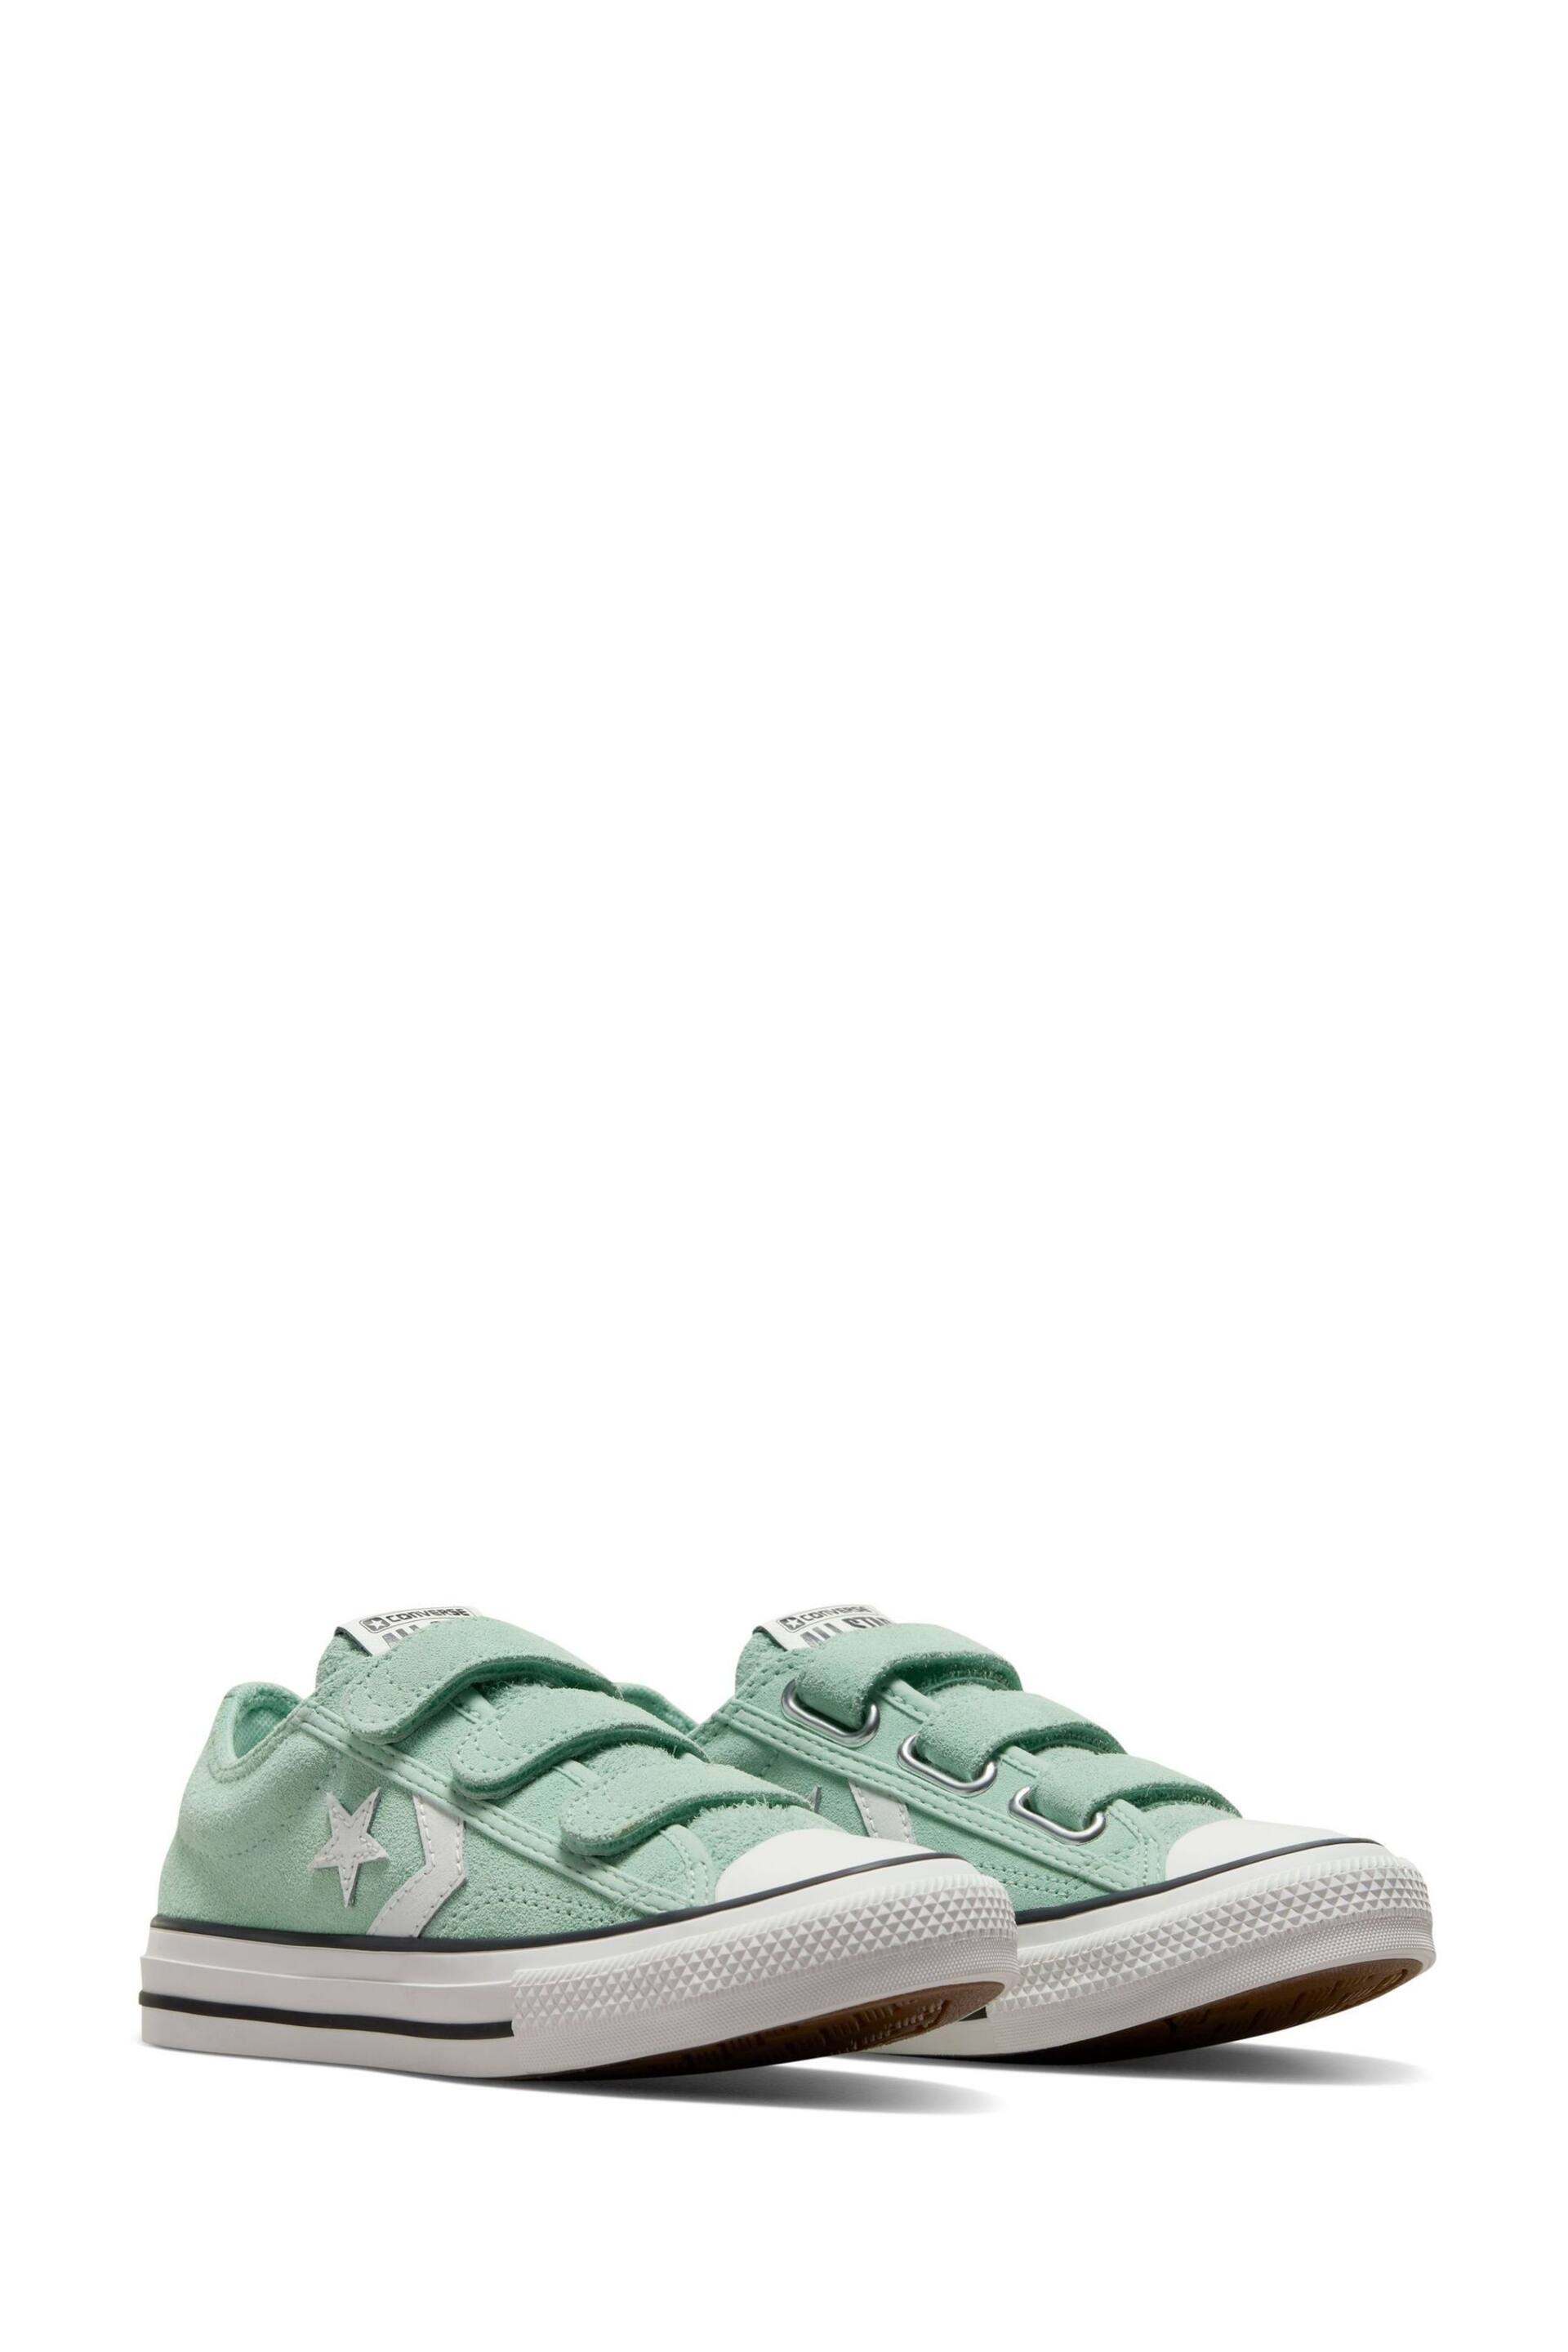 Converse Green Junior Star Player 76 3V Trainers - Image 9 of 9